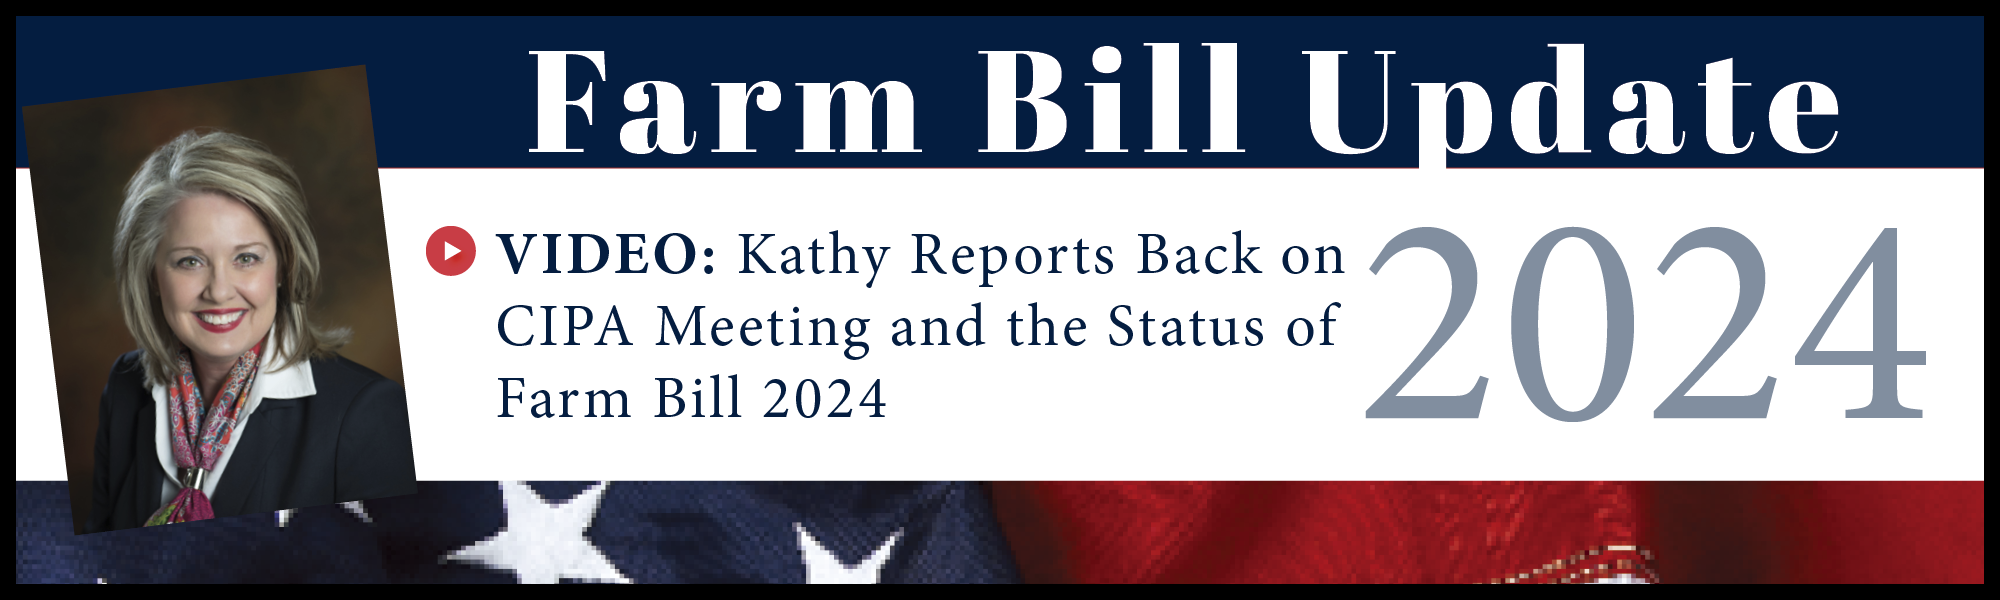 Video: Kathy Reports Back on CIPA Meeting and the Status of Farm Bill 2024